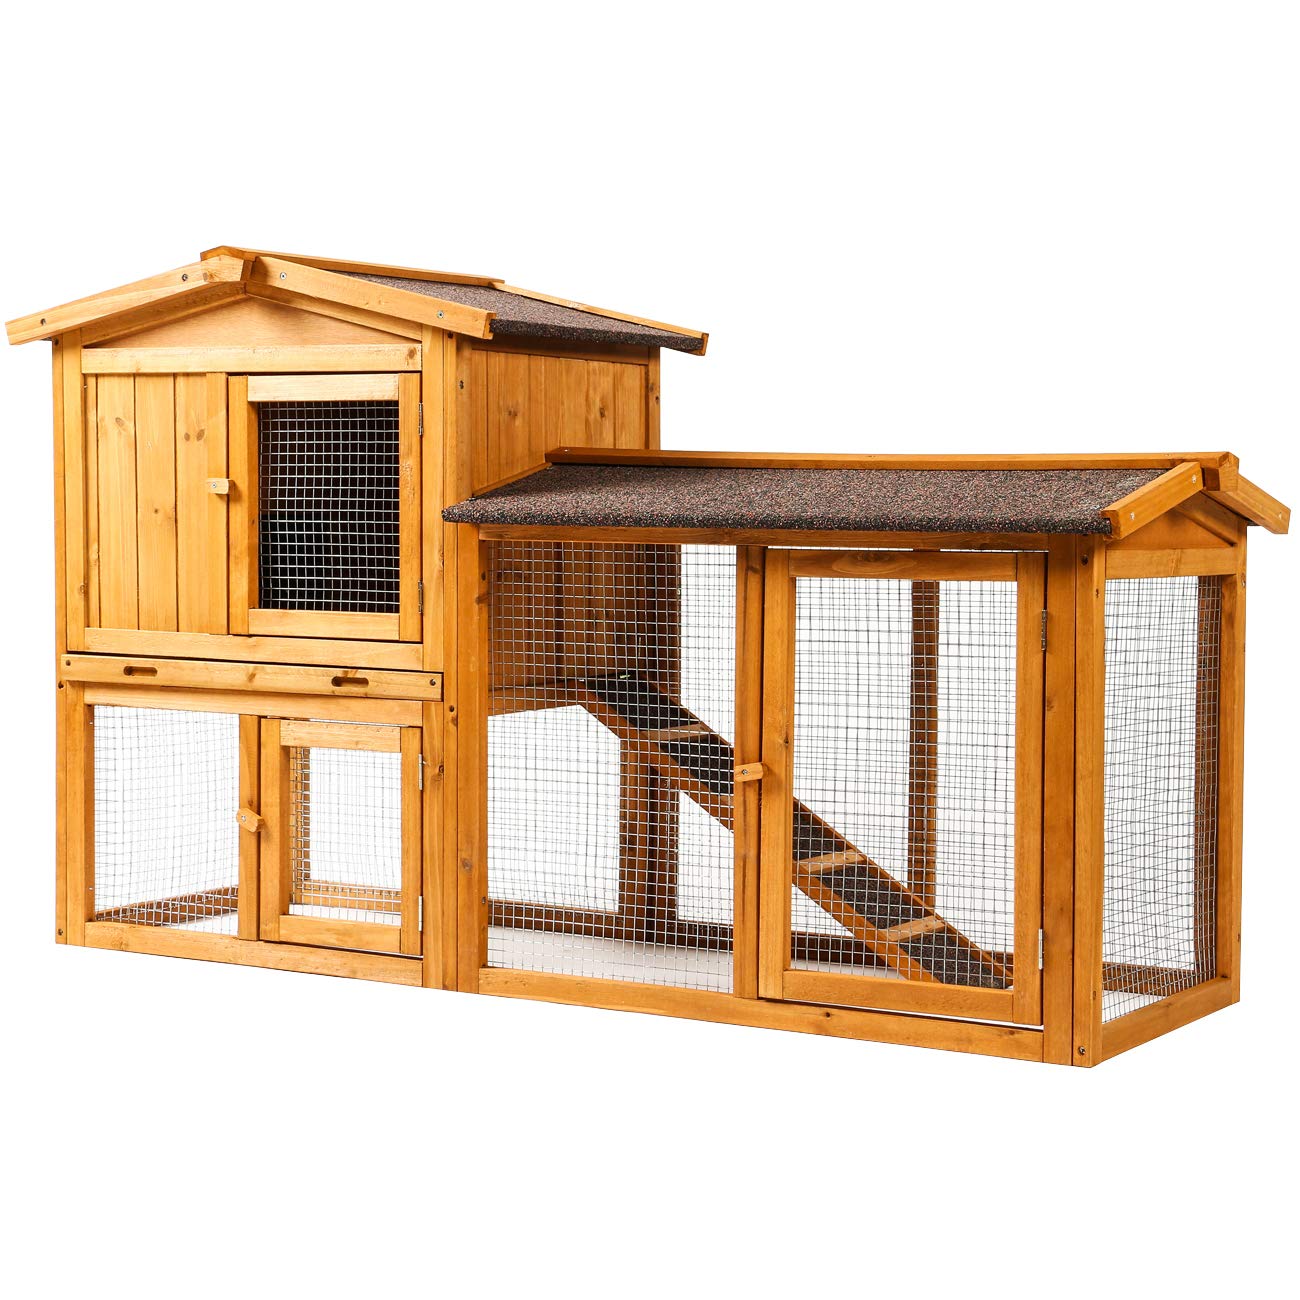 Rabbit-Proofing Your Chicken Hutch and Run: From Coop to Comfortable Bunny Abode